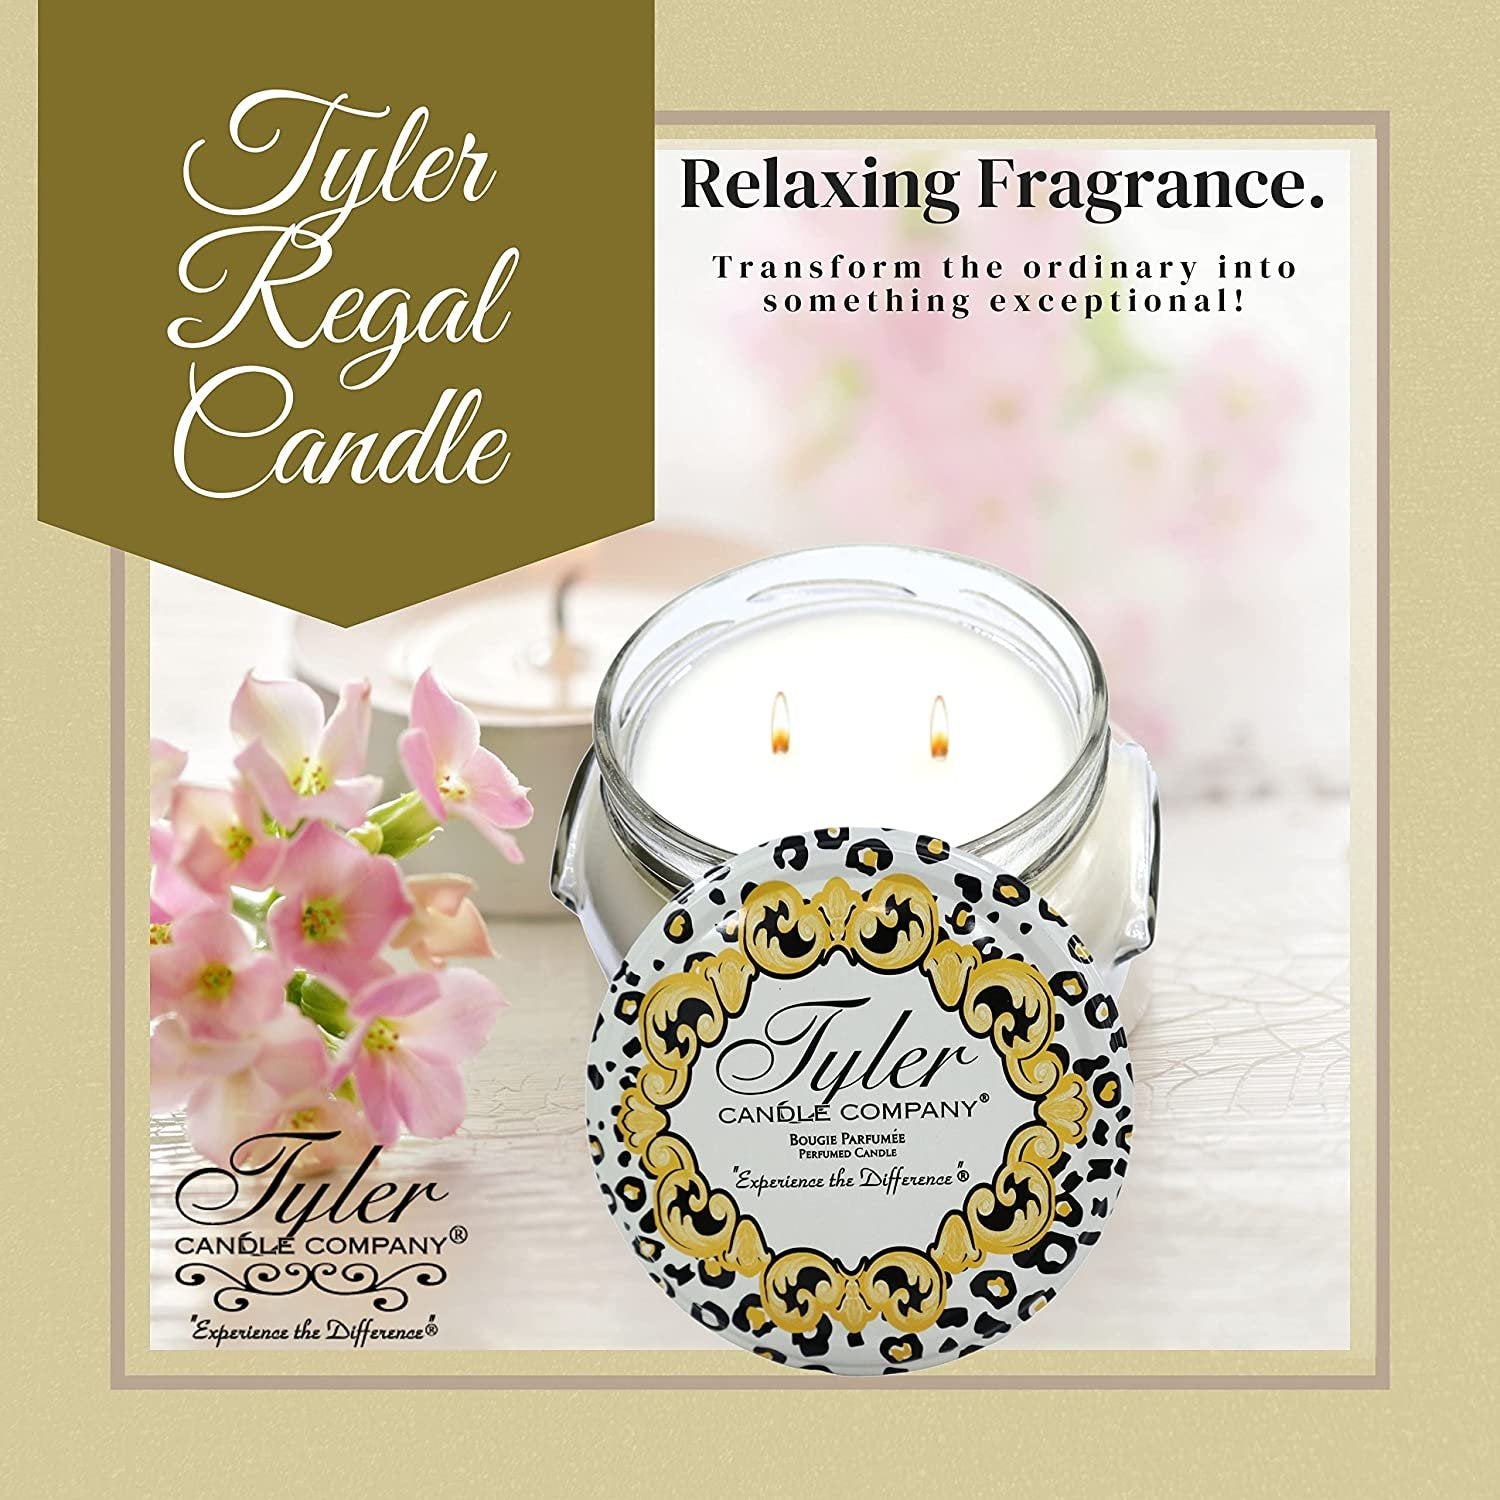 Tyler Candle Company Regal Jar Candle - Luxurious Scented Candle with Essential Oils - Long Burning Candles 50-60 Hours - Large Candle 11 oz with Worldwide Nutrition Multi Purpose Key Chain